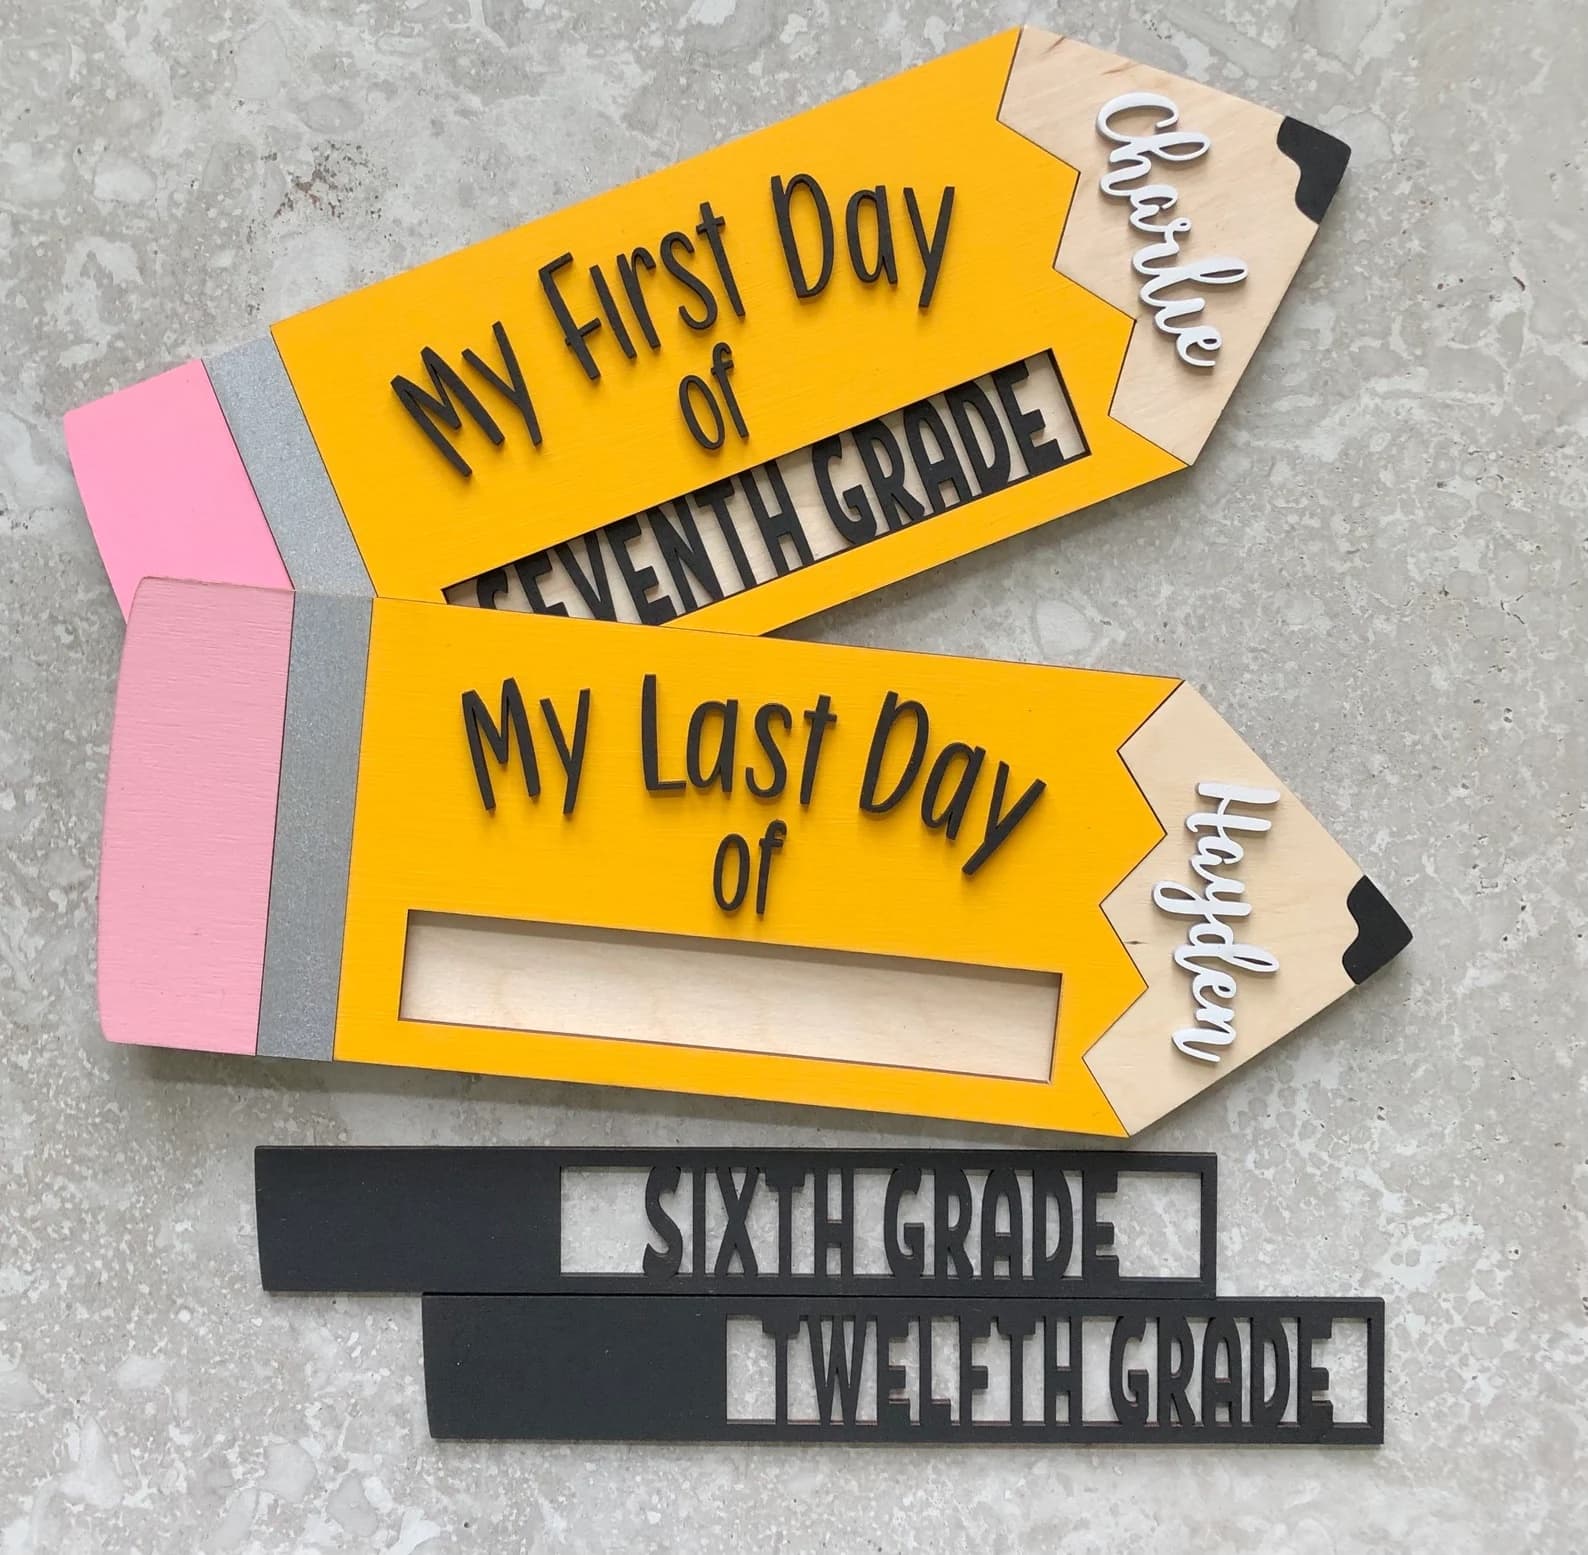 First and Last Day of School Pencil signs